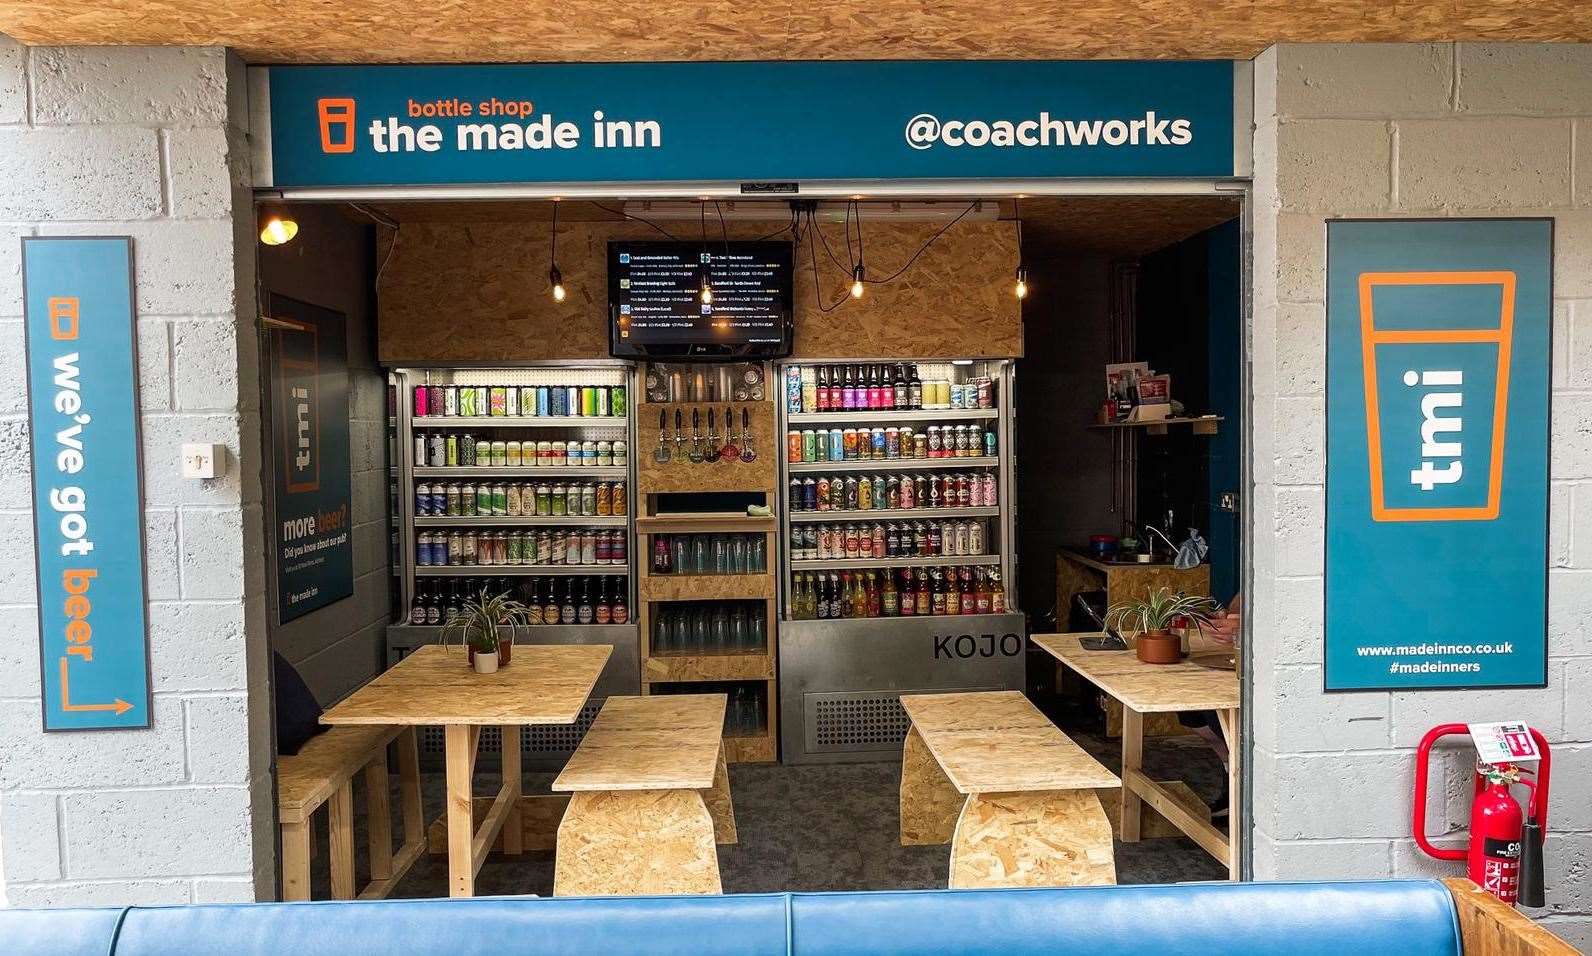 The Made Inn at Coachworks will call last orders on December 23